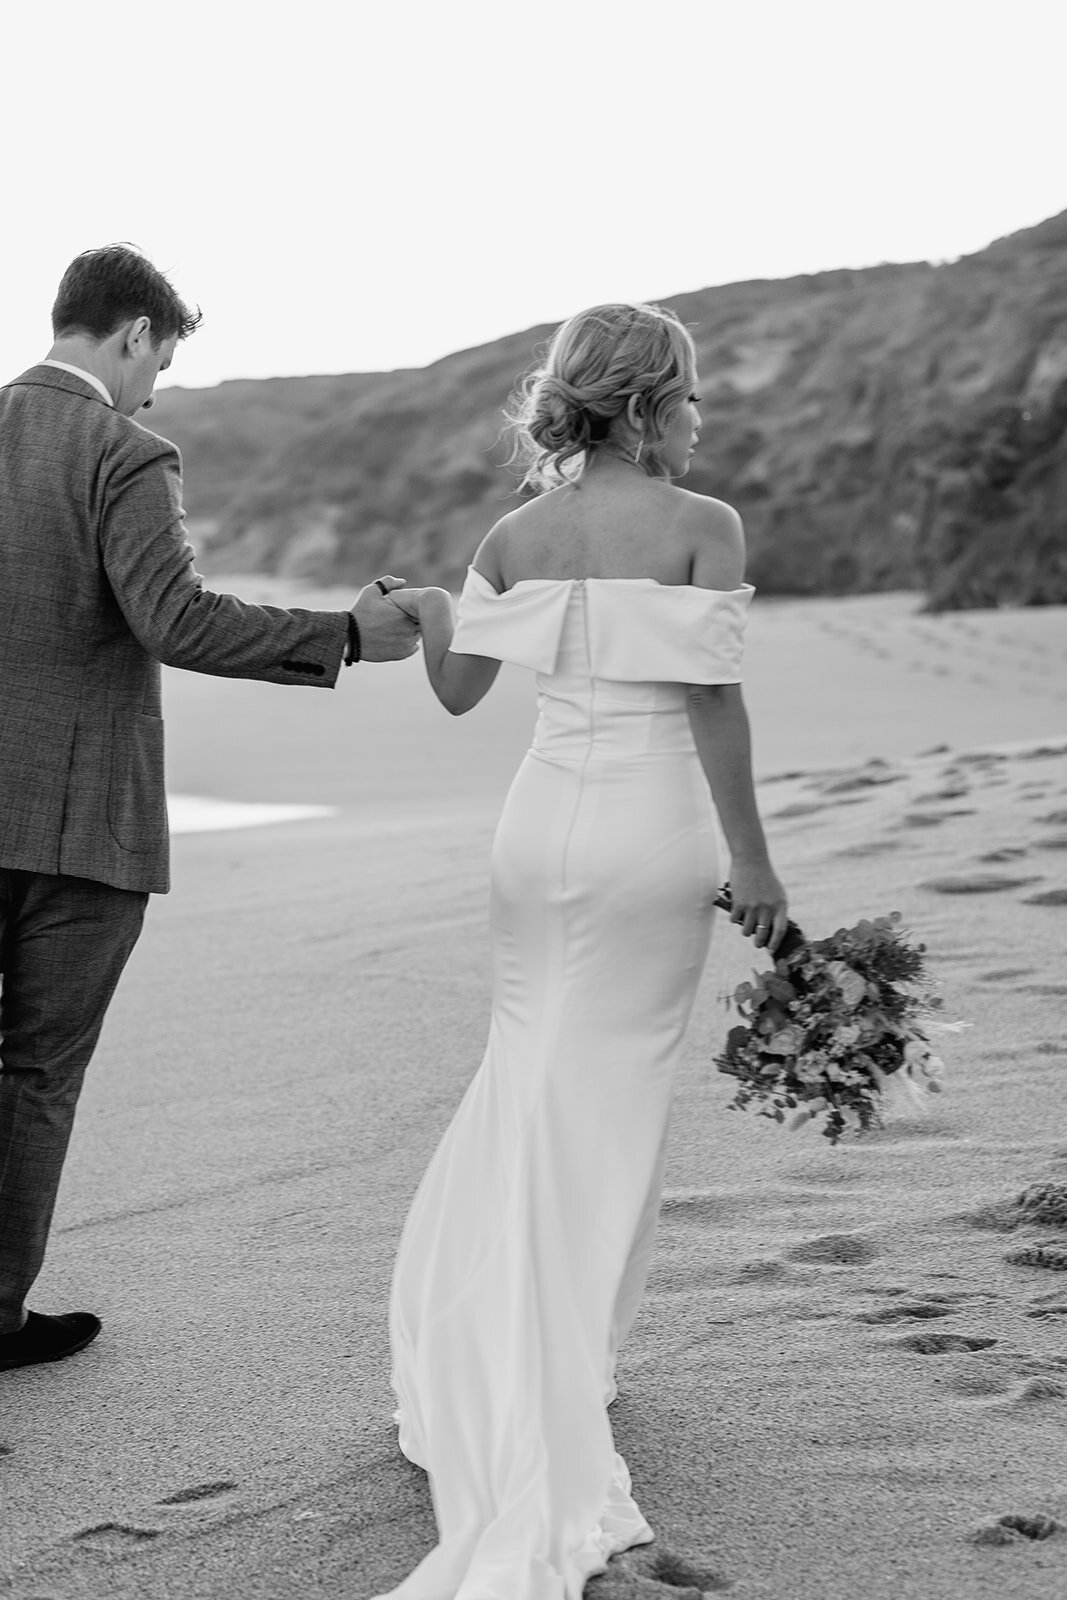 black and white photo of a woman and a man walking along the beach, holding flowers, about to get married